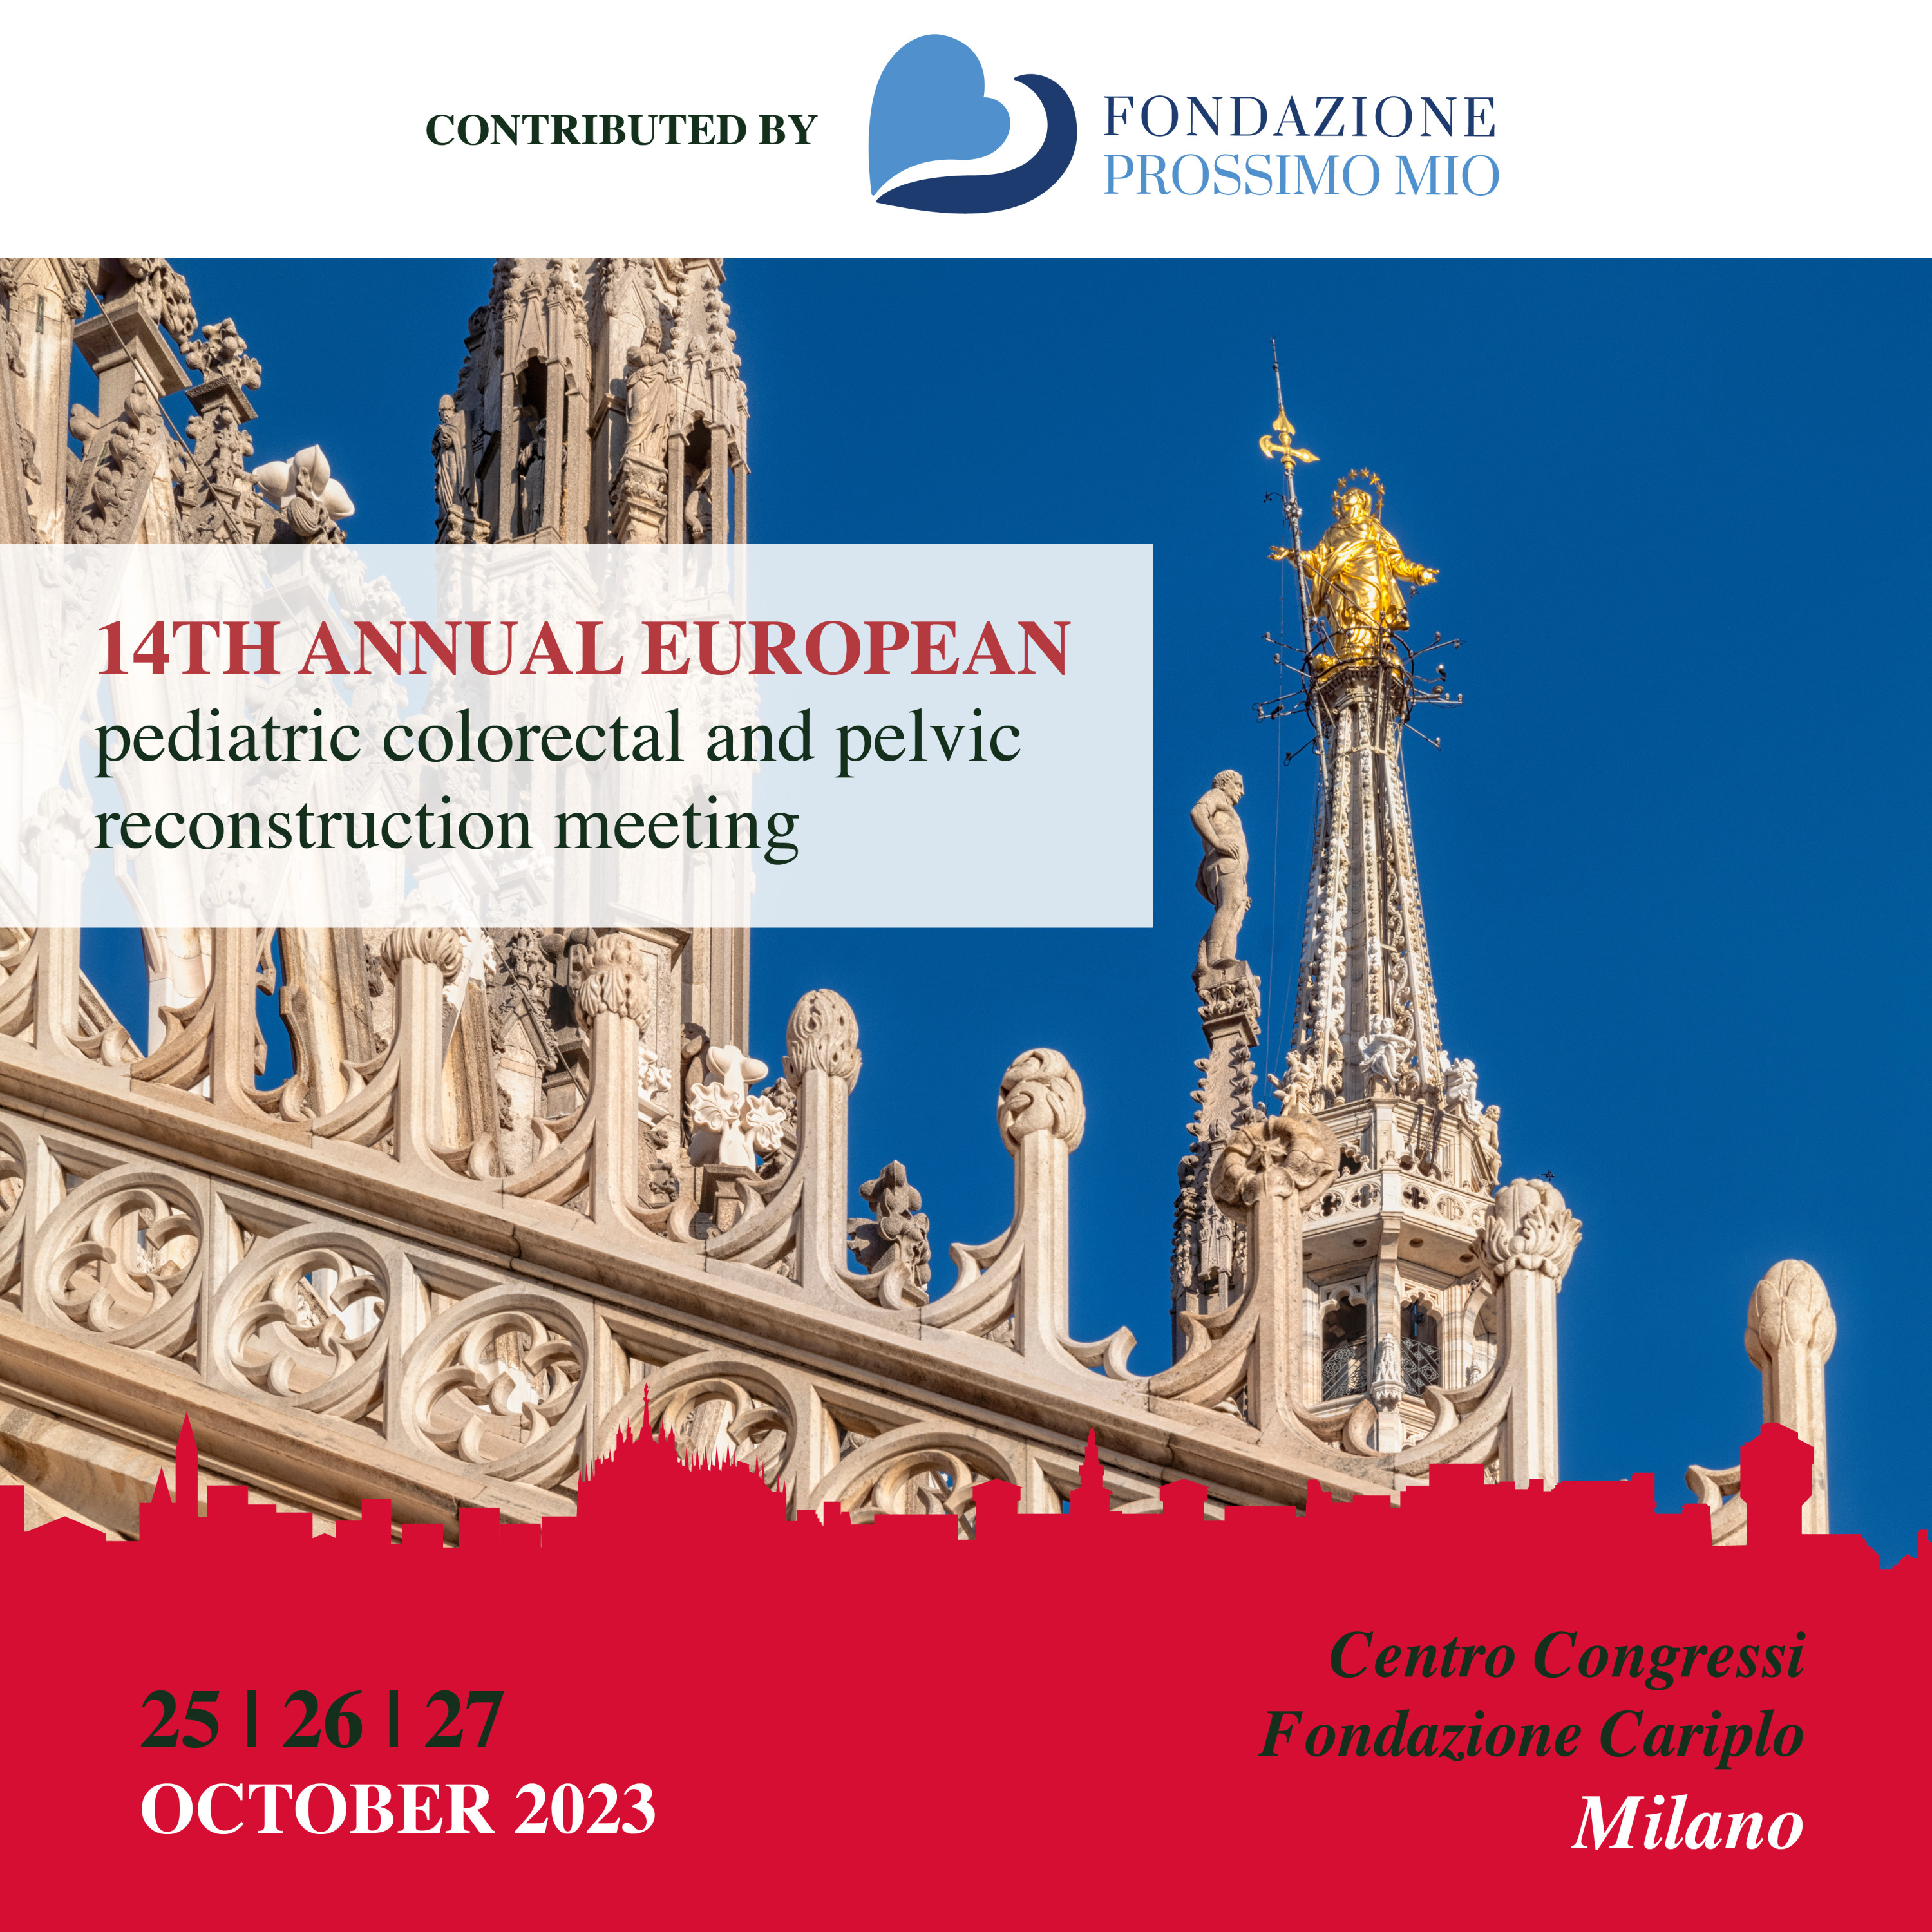 14TH ANNUAL EUROPEAN pediatric colorectal and pelvic reconstruction meeting